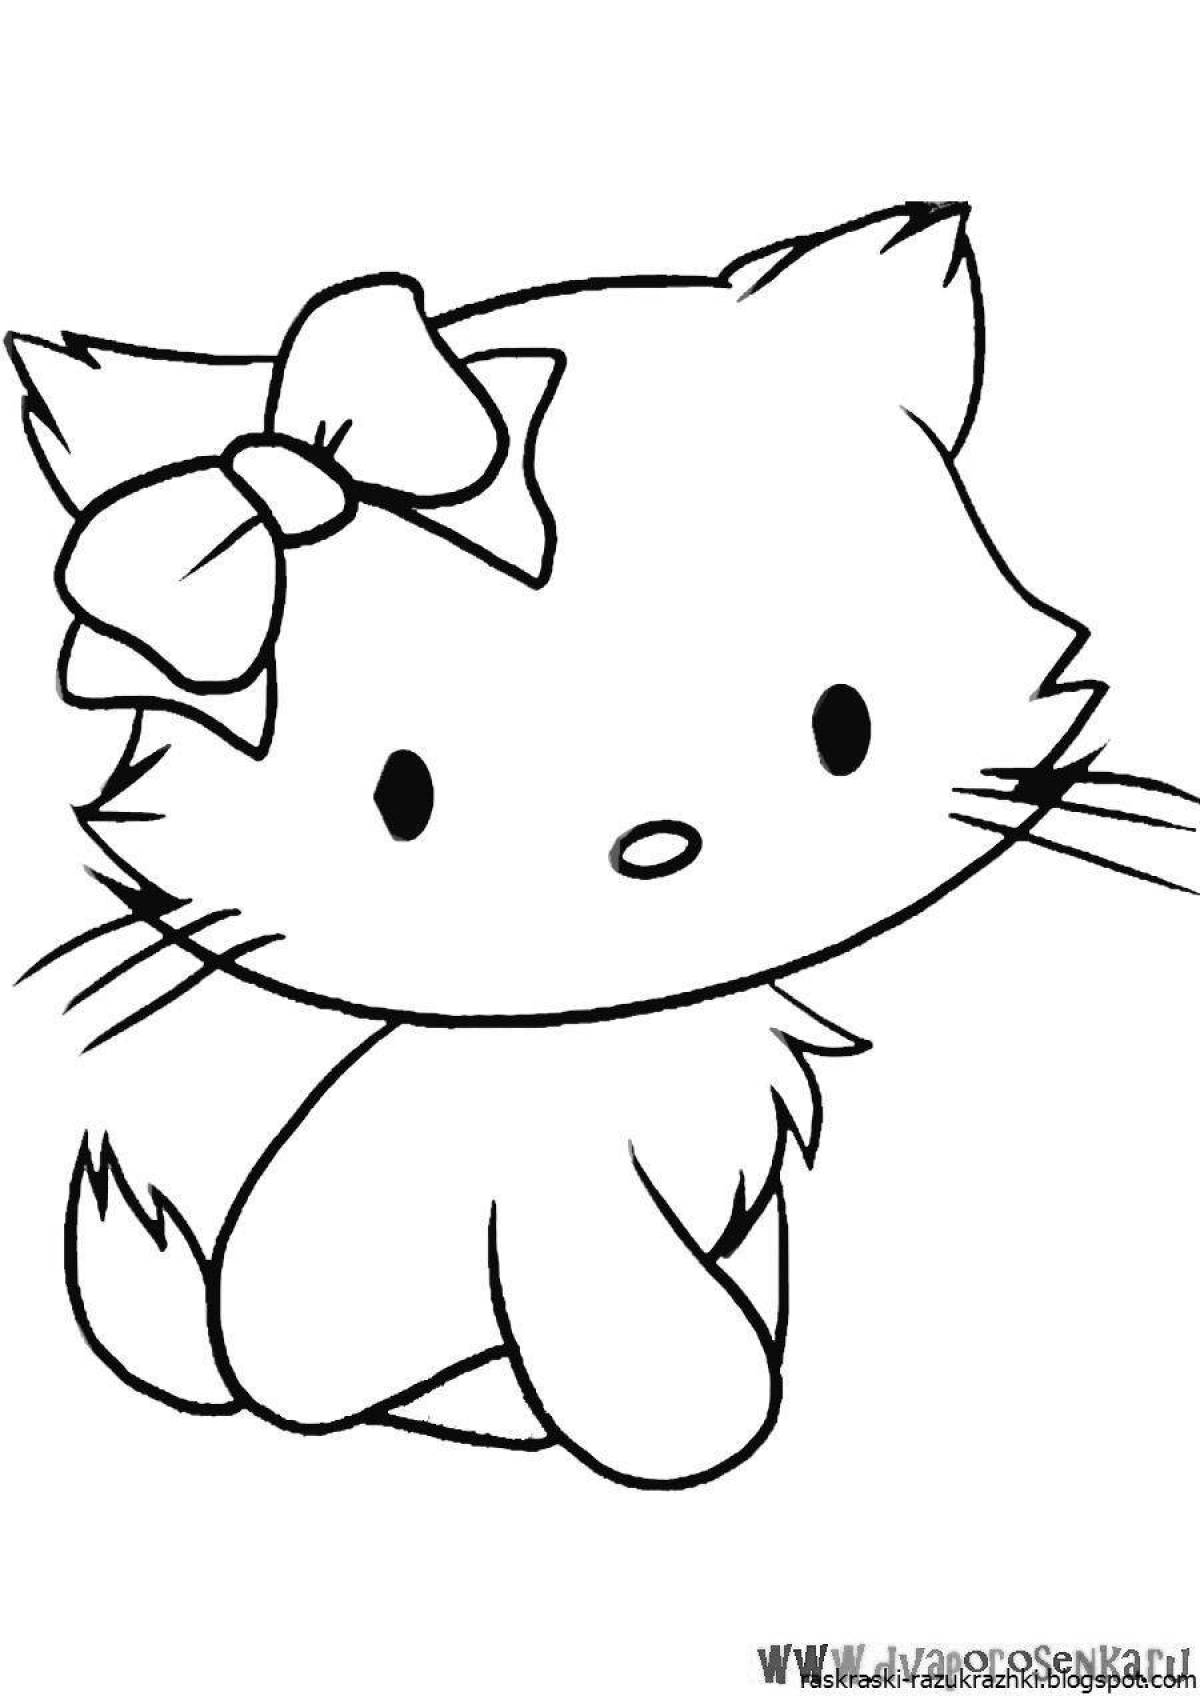 Coloring page with a cute cat with a gentle muzzle